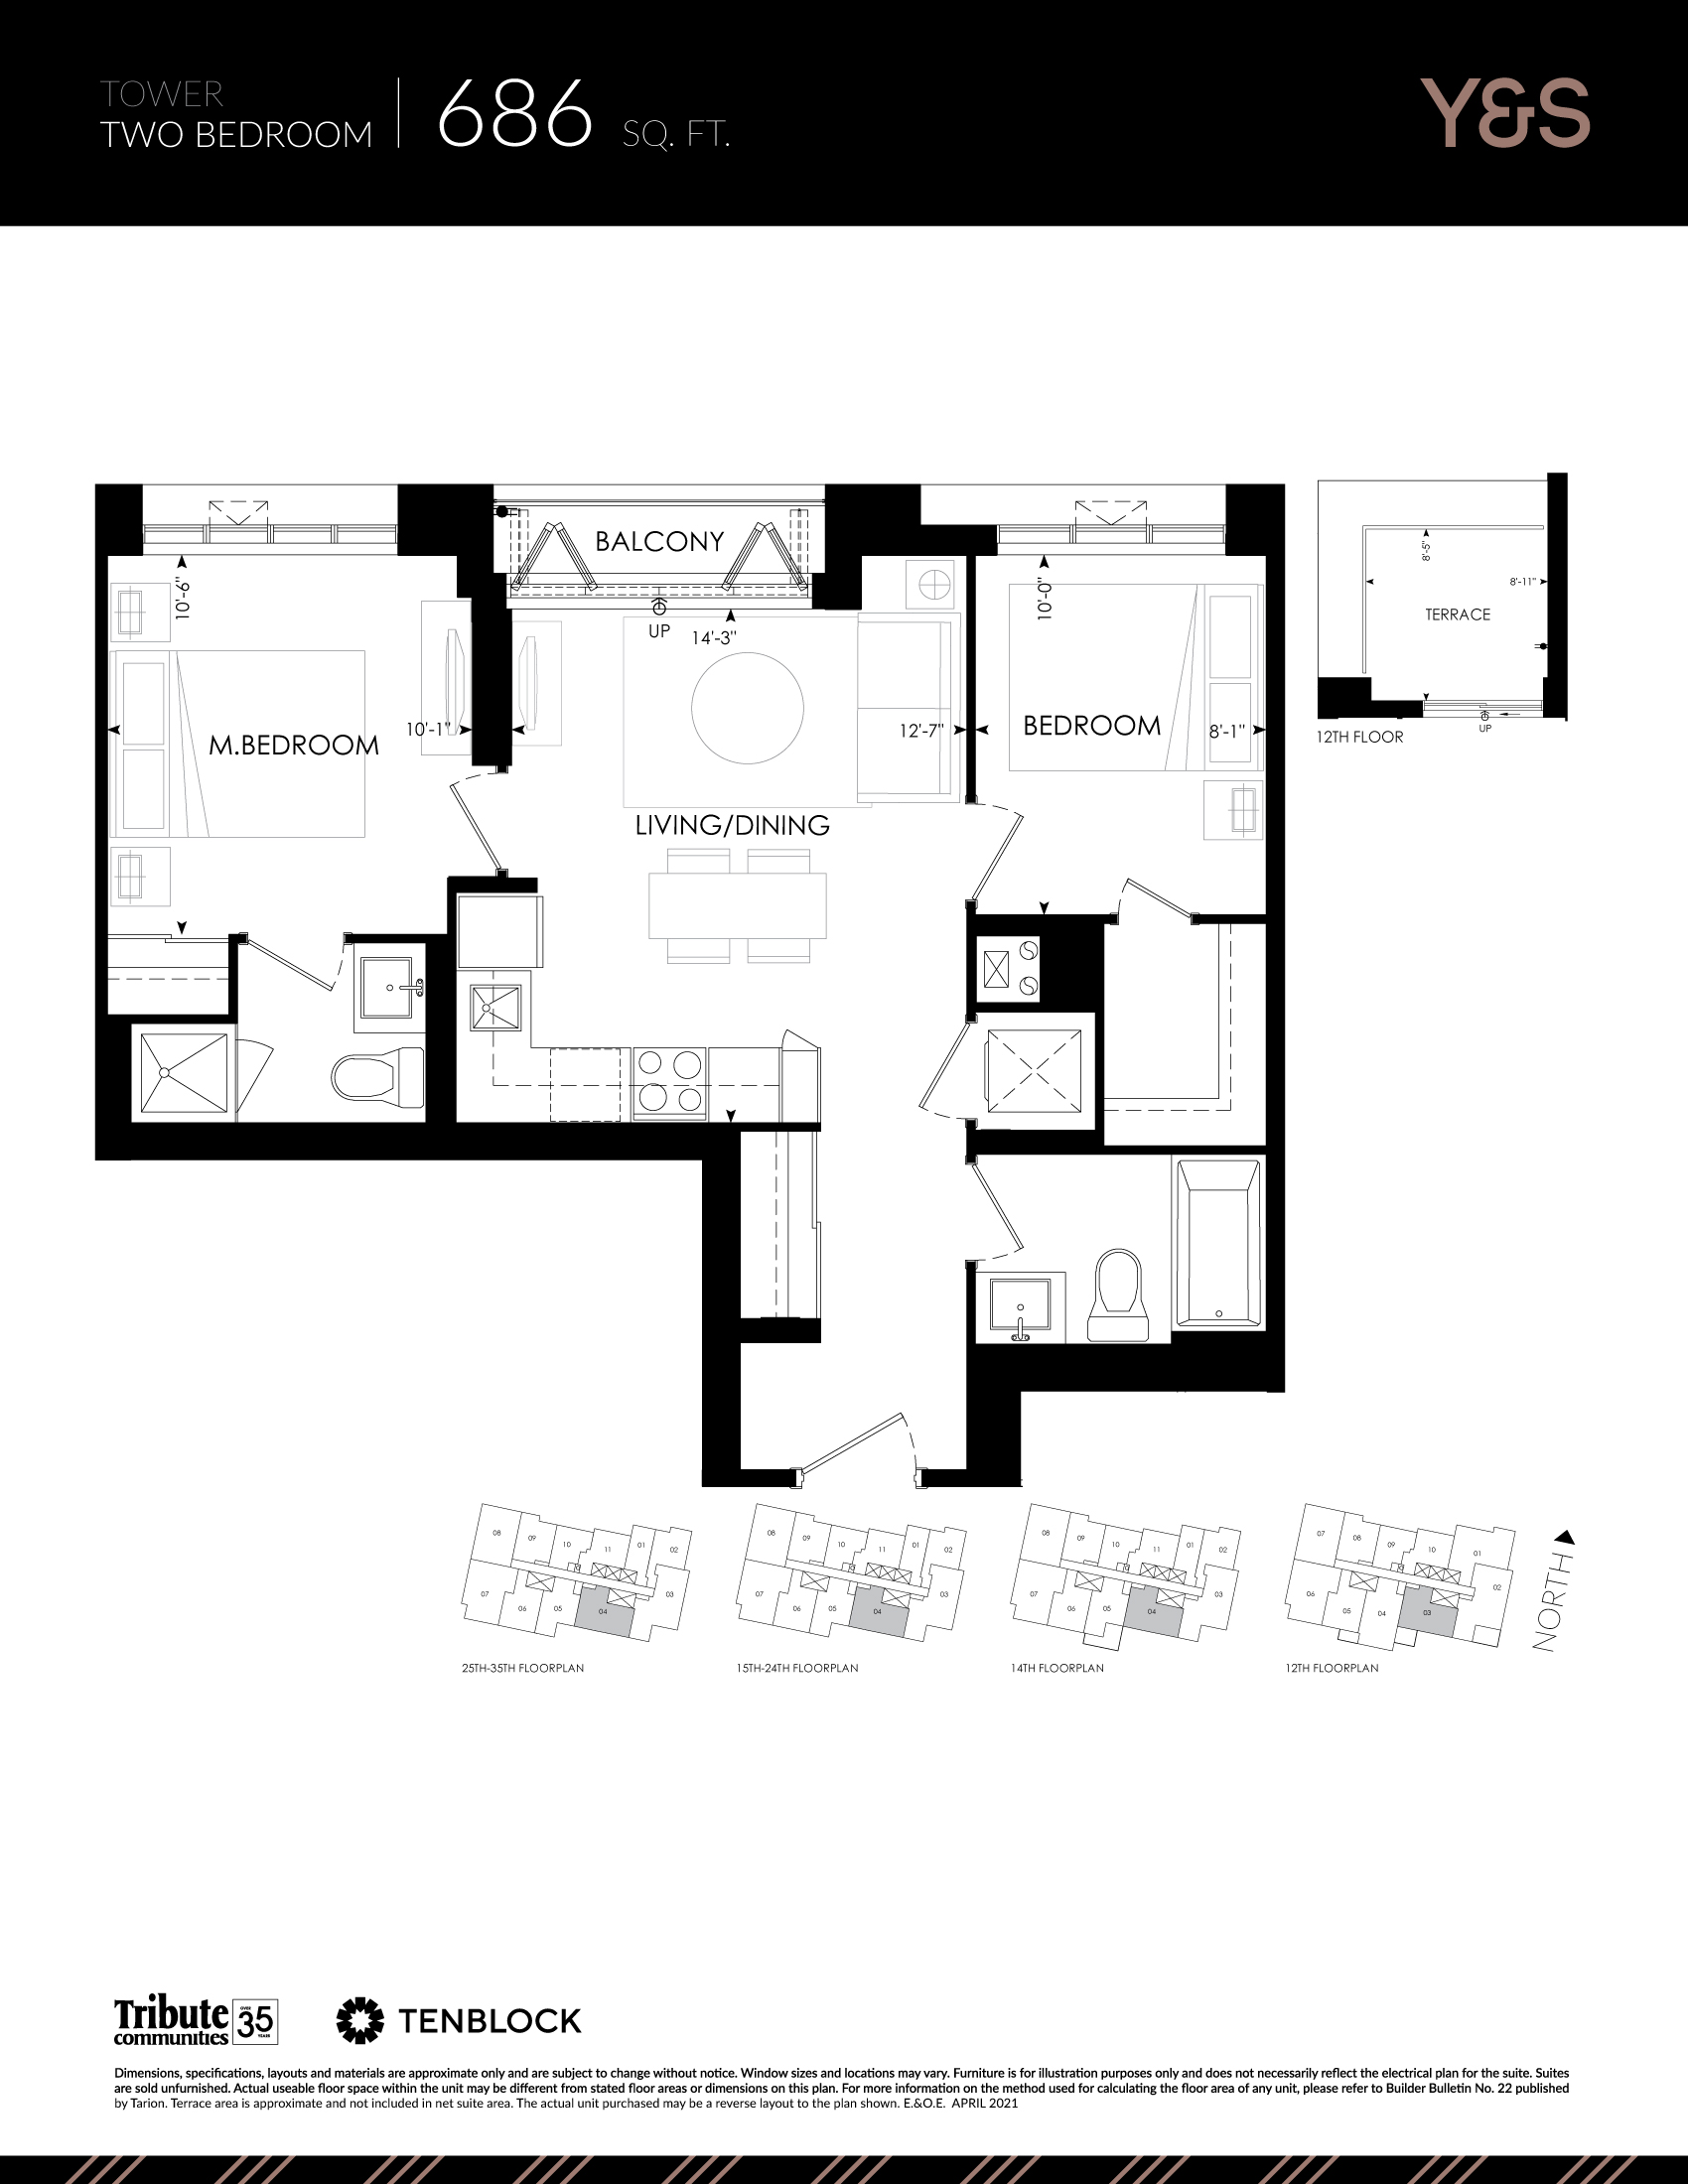 TWO BEDROOM-686 SQ. FT.